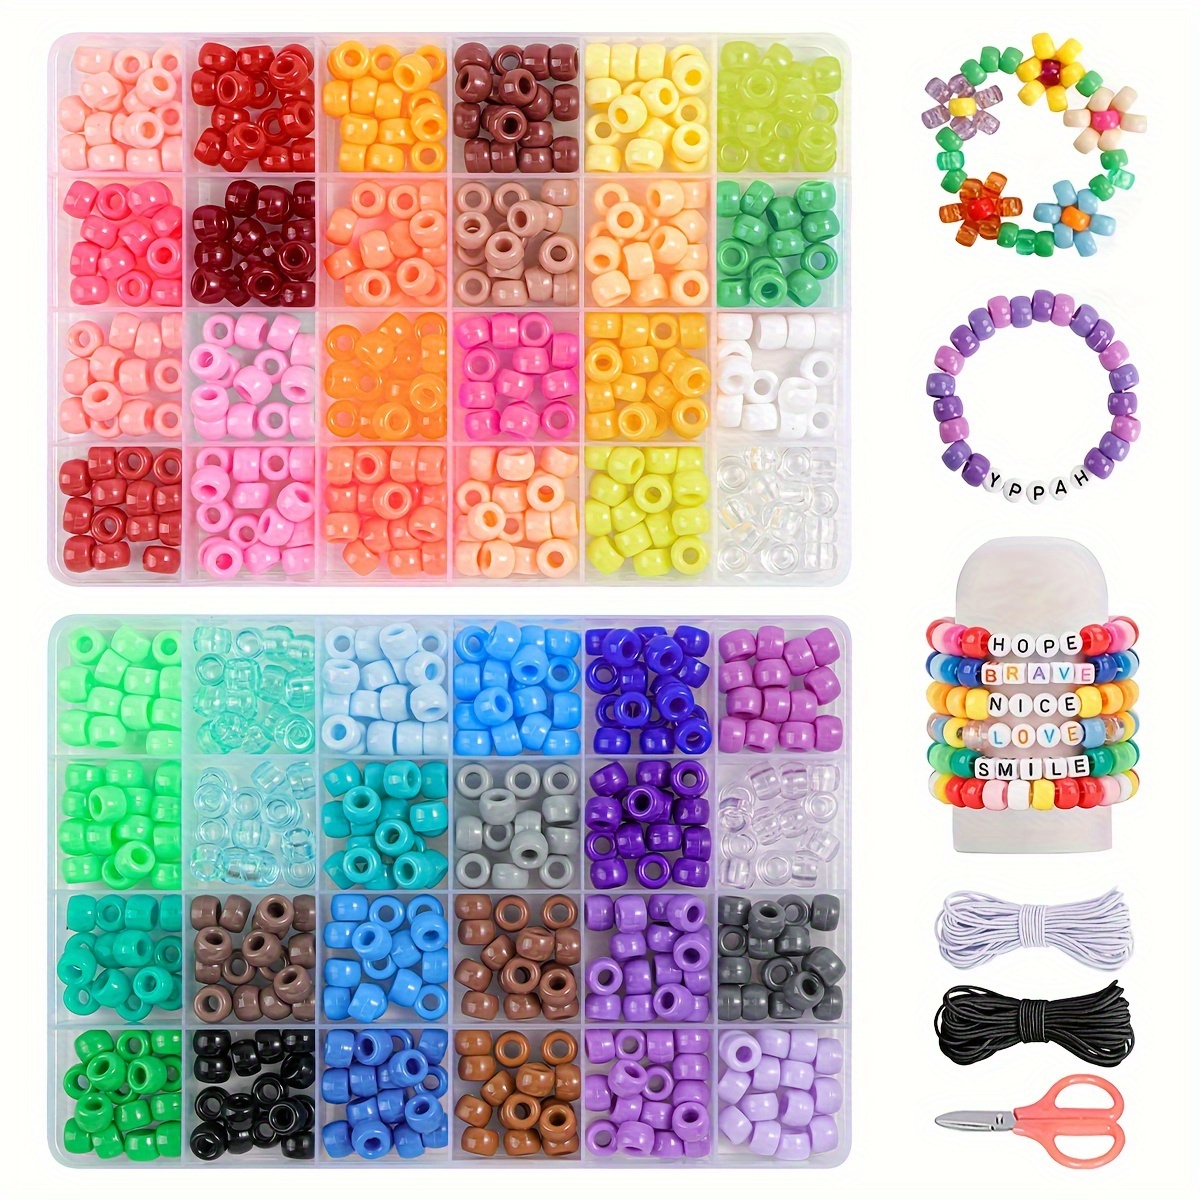  Luwanio Bracelet Making Kit, Pony Beads Clay Beads Smiley Beads  Letter Beads for Friendship Bracelets Jewelry Making, Kandi Bracelet Kit,  DIY Arts and Crafts Gifts for Girls Age 6 7 8 9 10-12